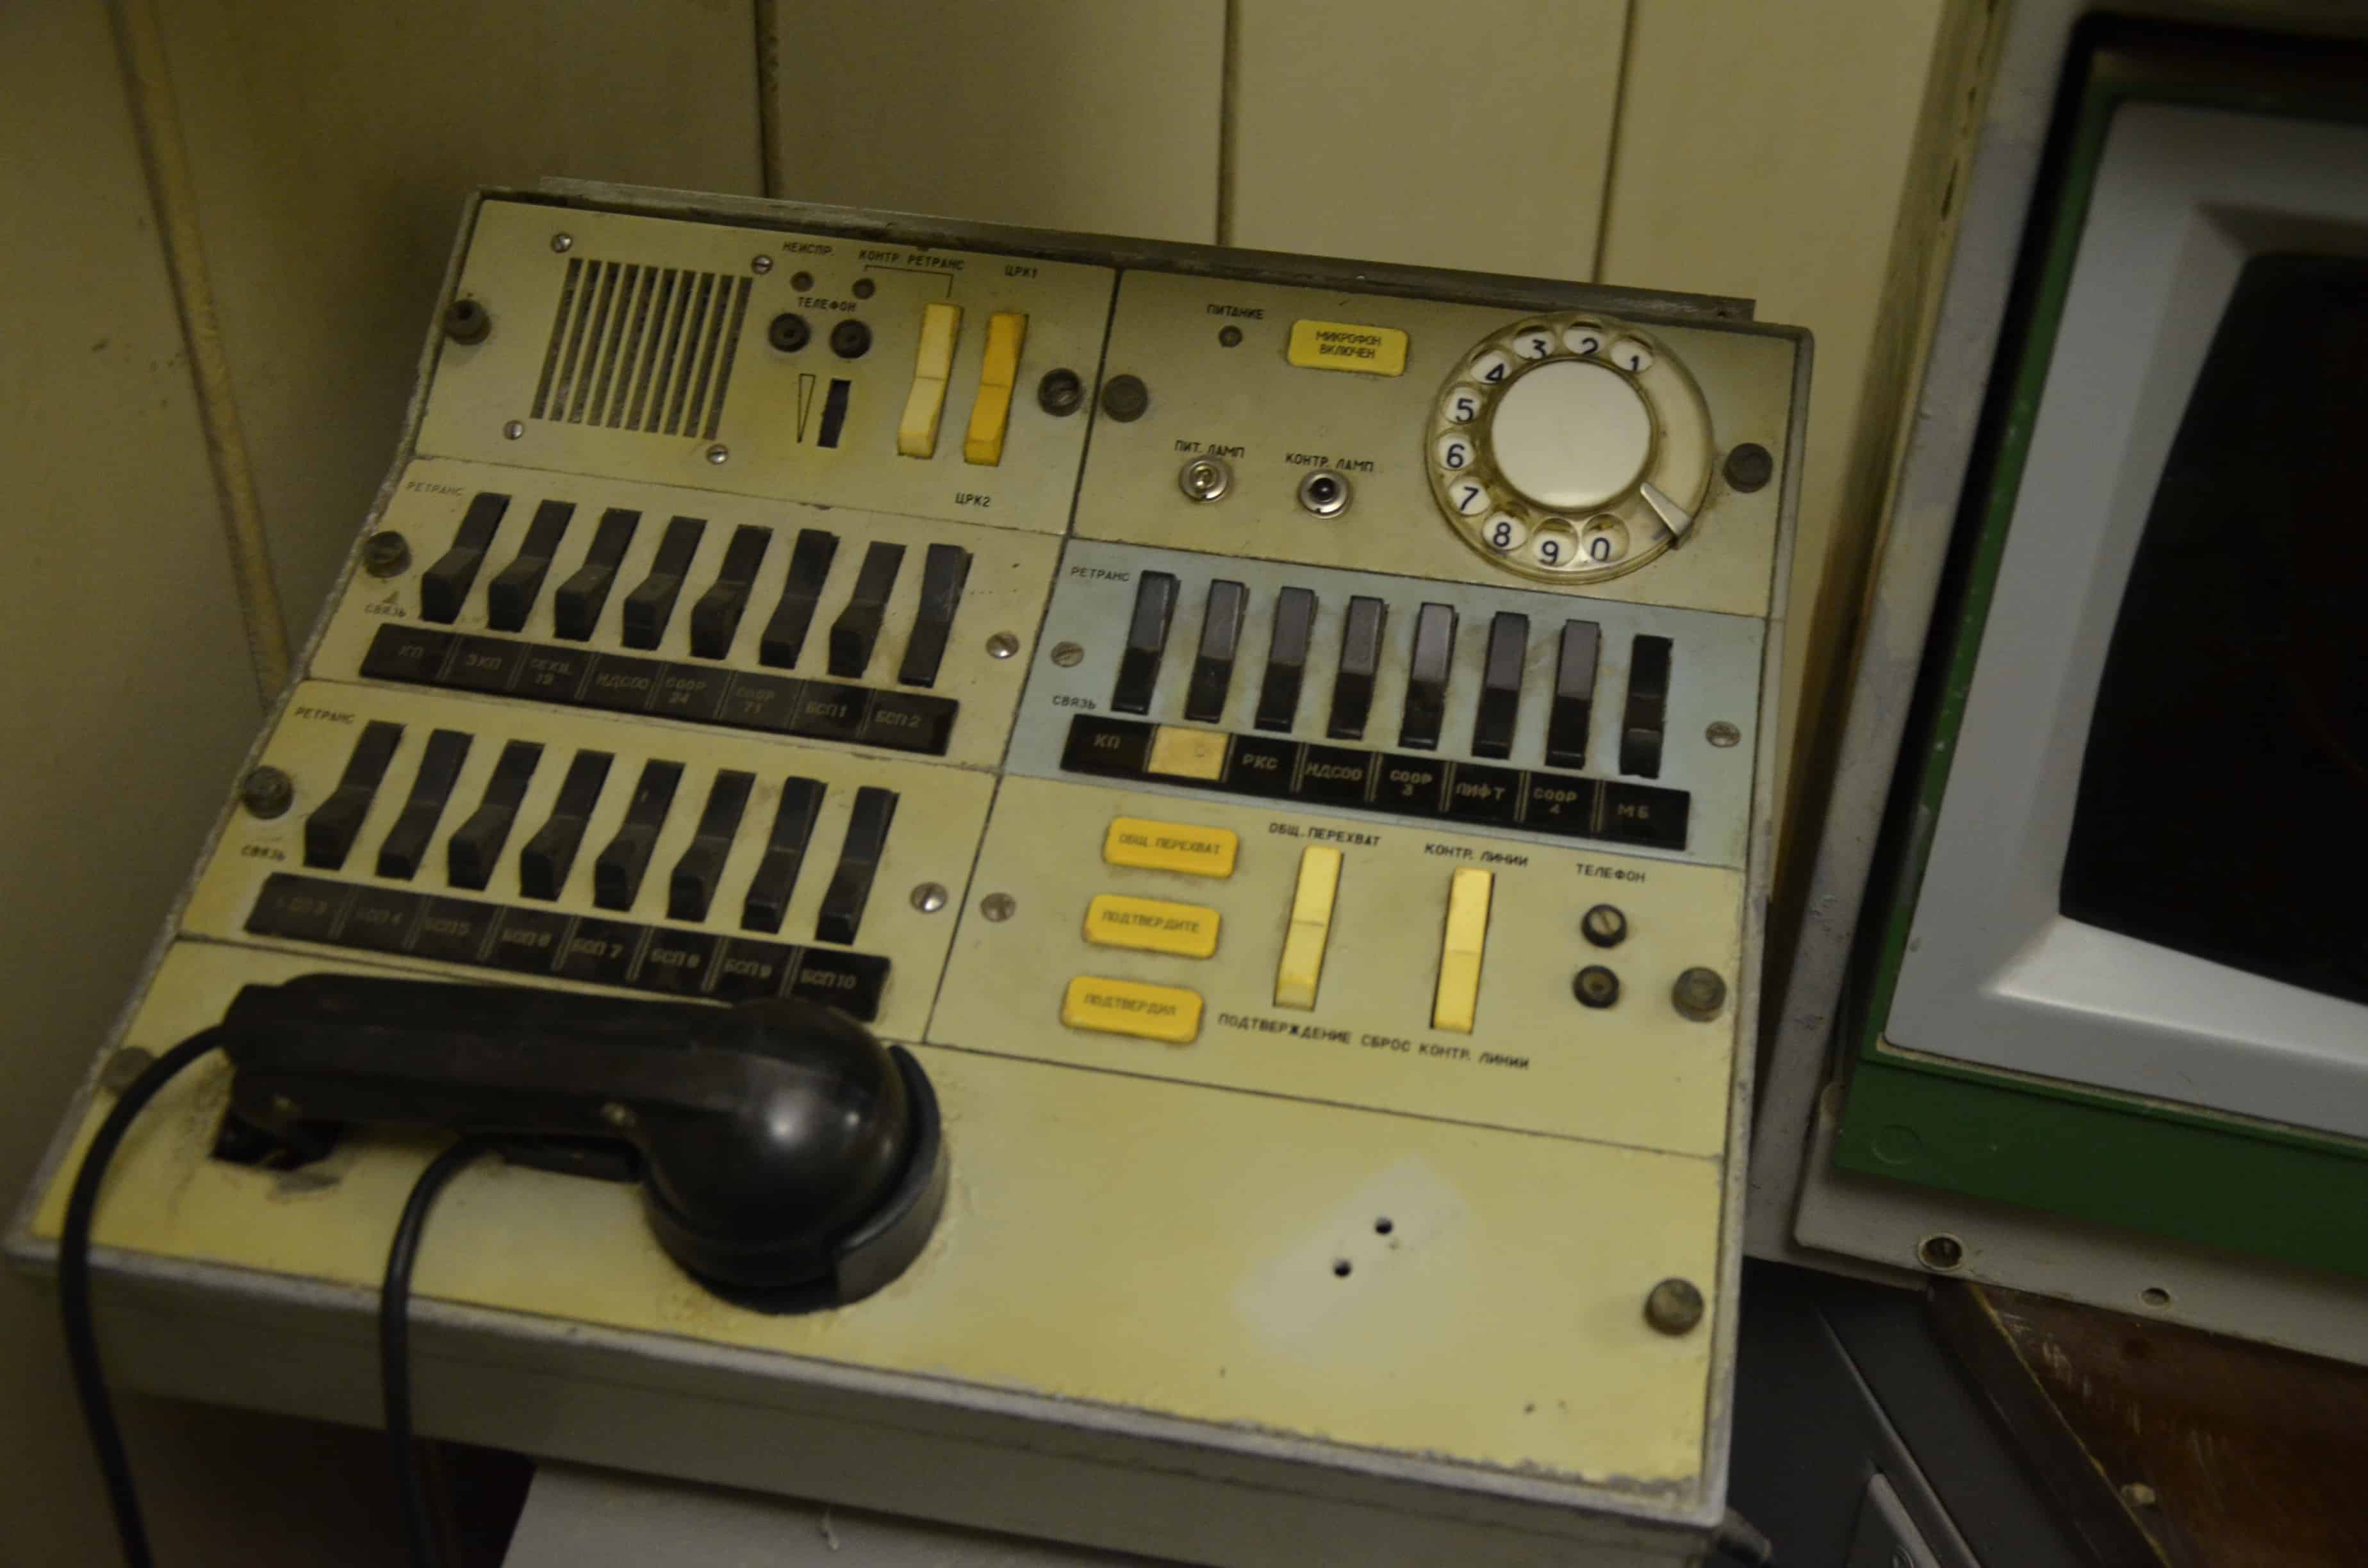 Command center in the Unified Command Post at Strategic Missile Forces Museum near Pobuzke, Ukraine